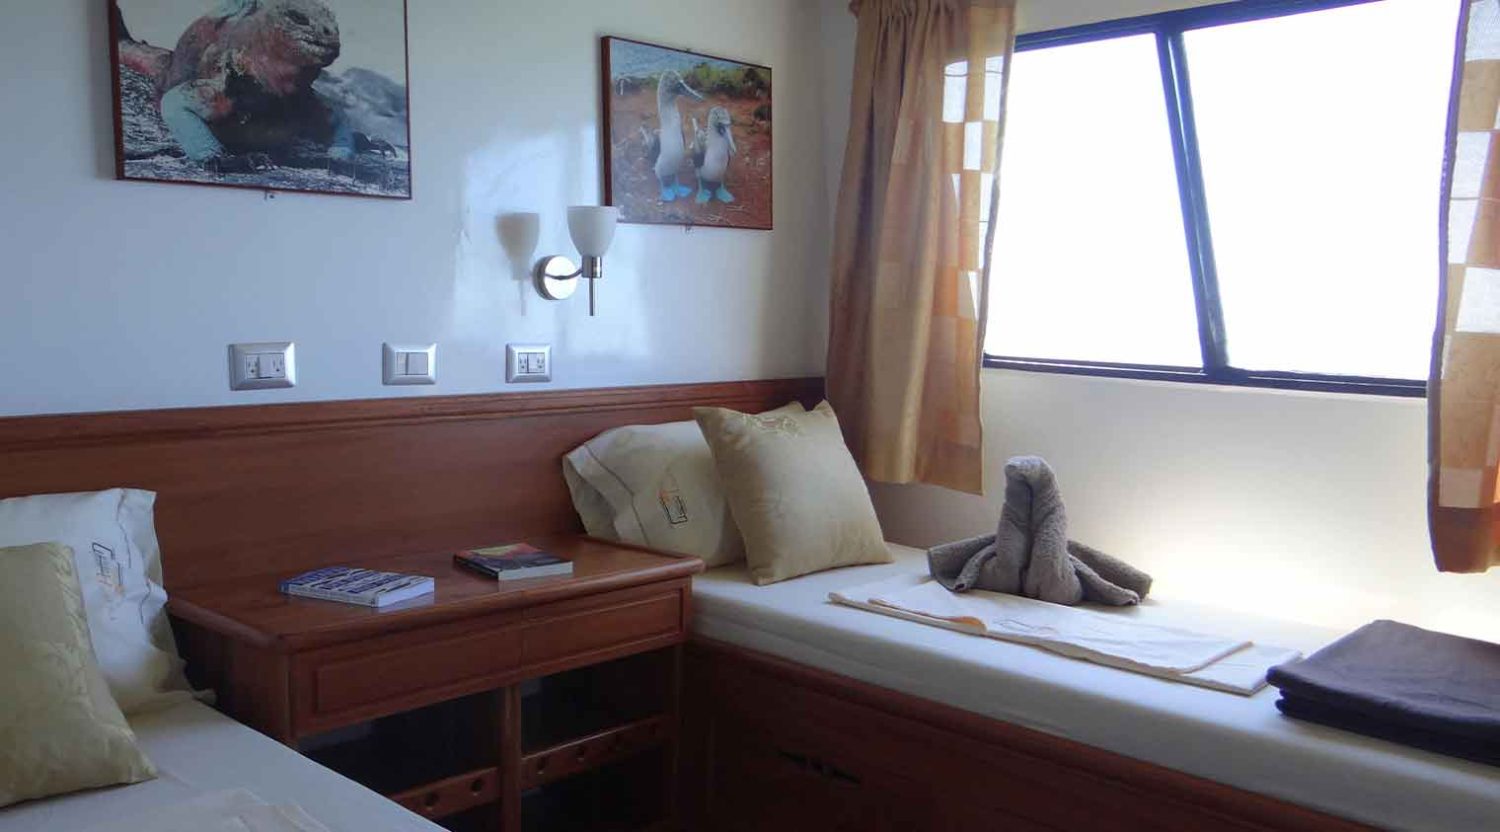 angelito yacht two bed bedroom galapagos islands